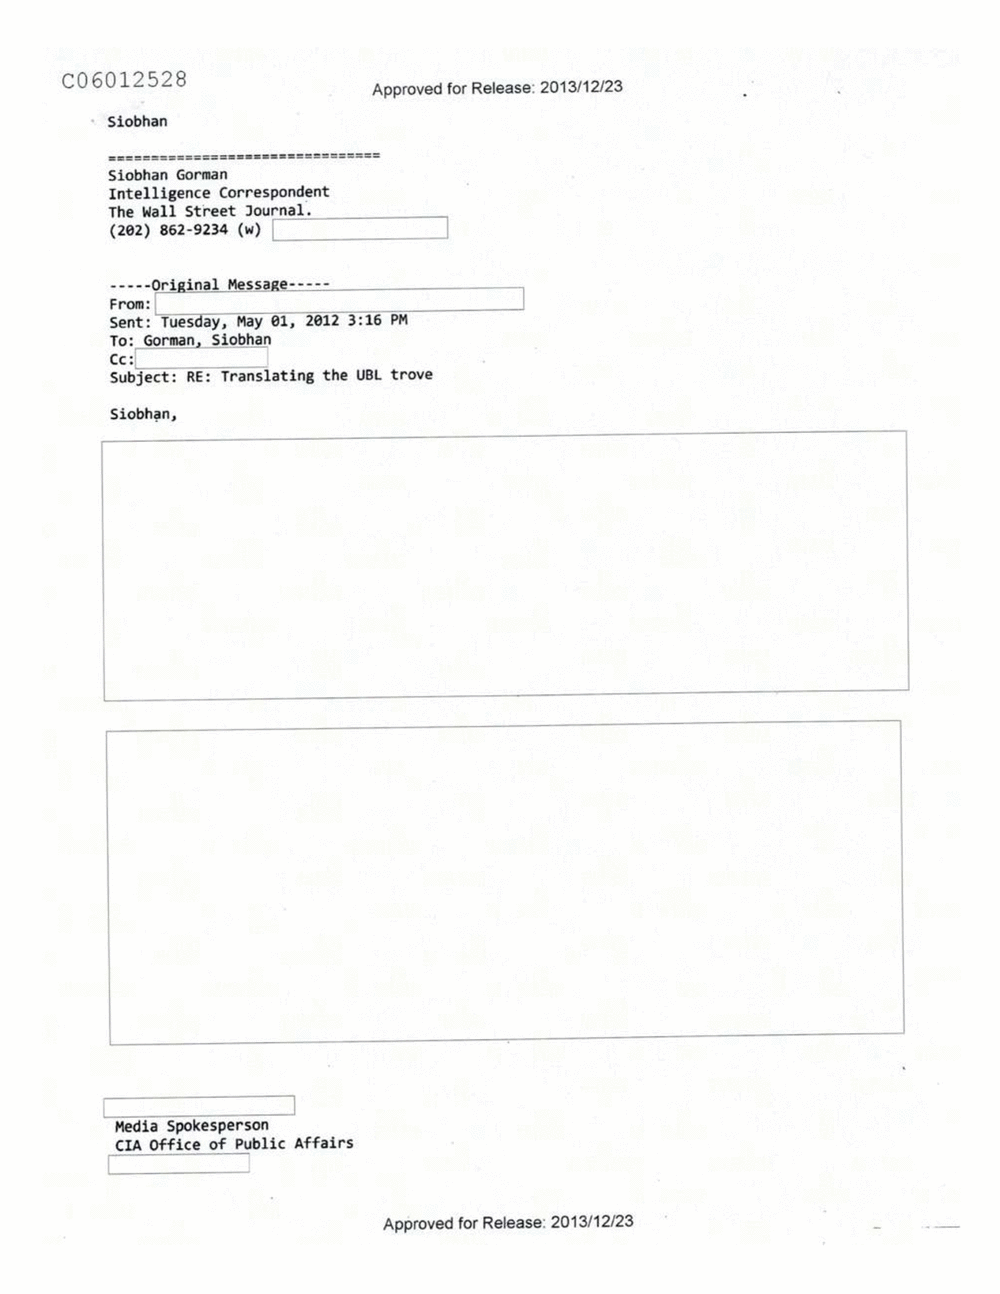 Page 54 from Email Correspondence Between Reporters and CIA Flacks